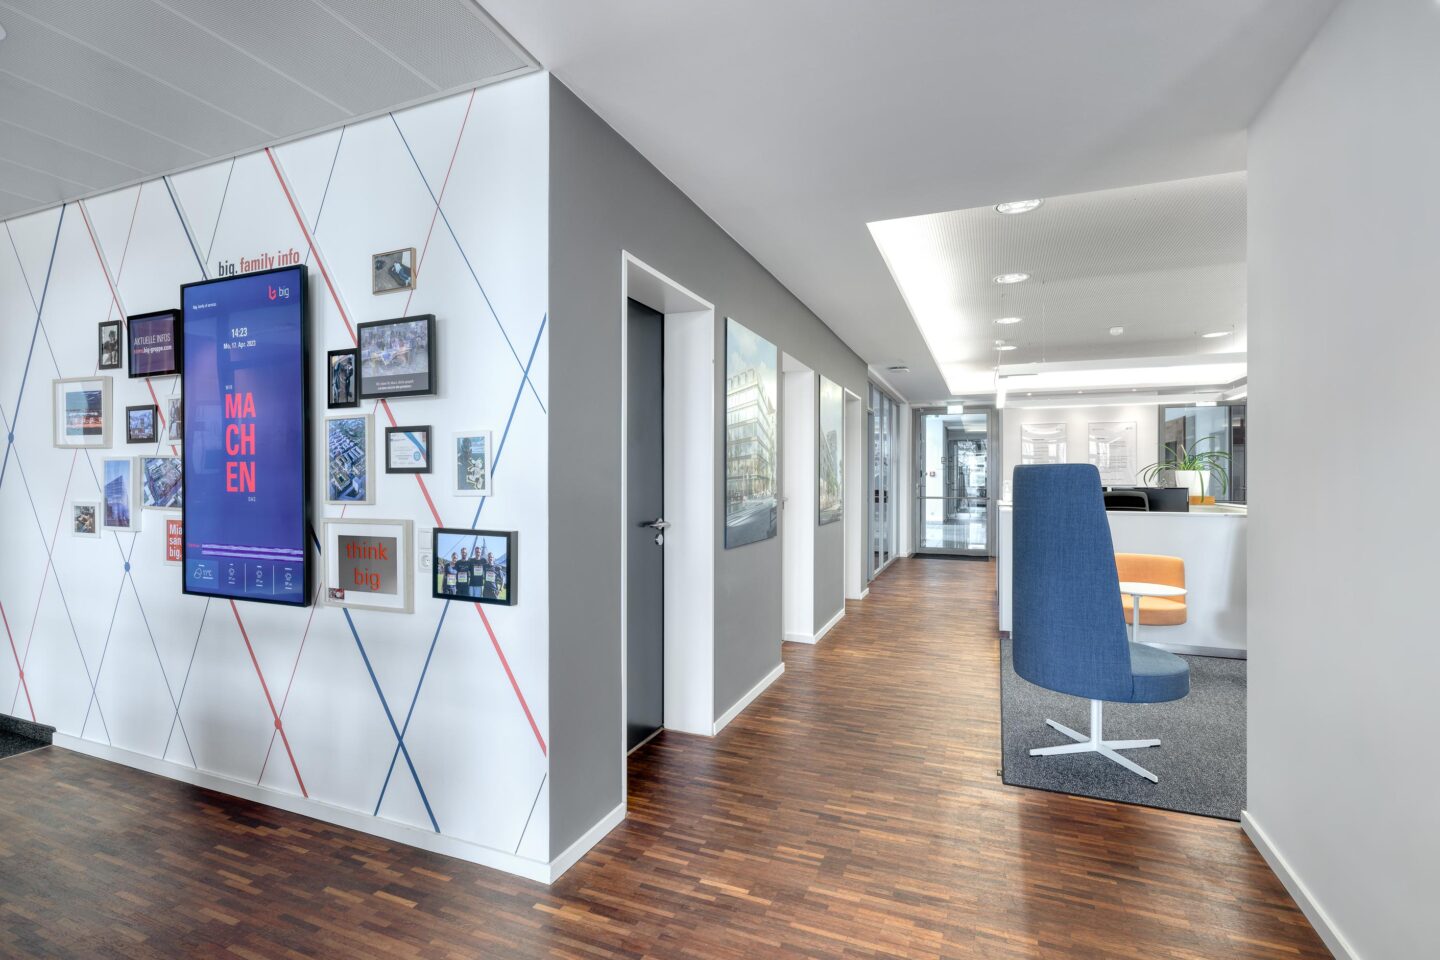 A special highlight is the digital picture wall in the entrance area, which displays daily updates on projects, progress and corporate culture.